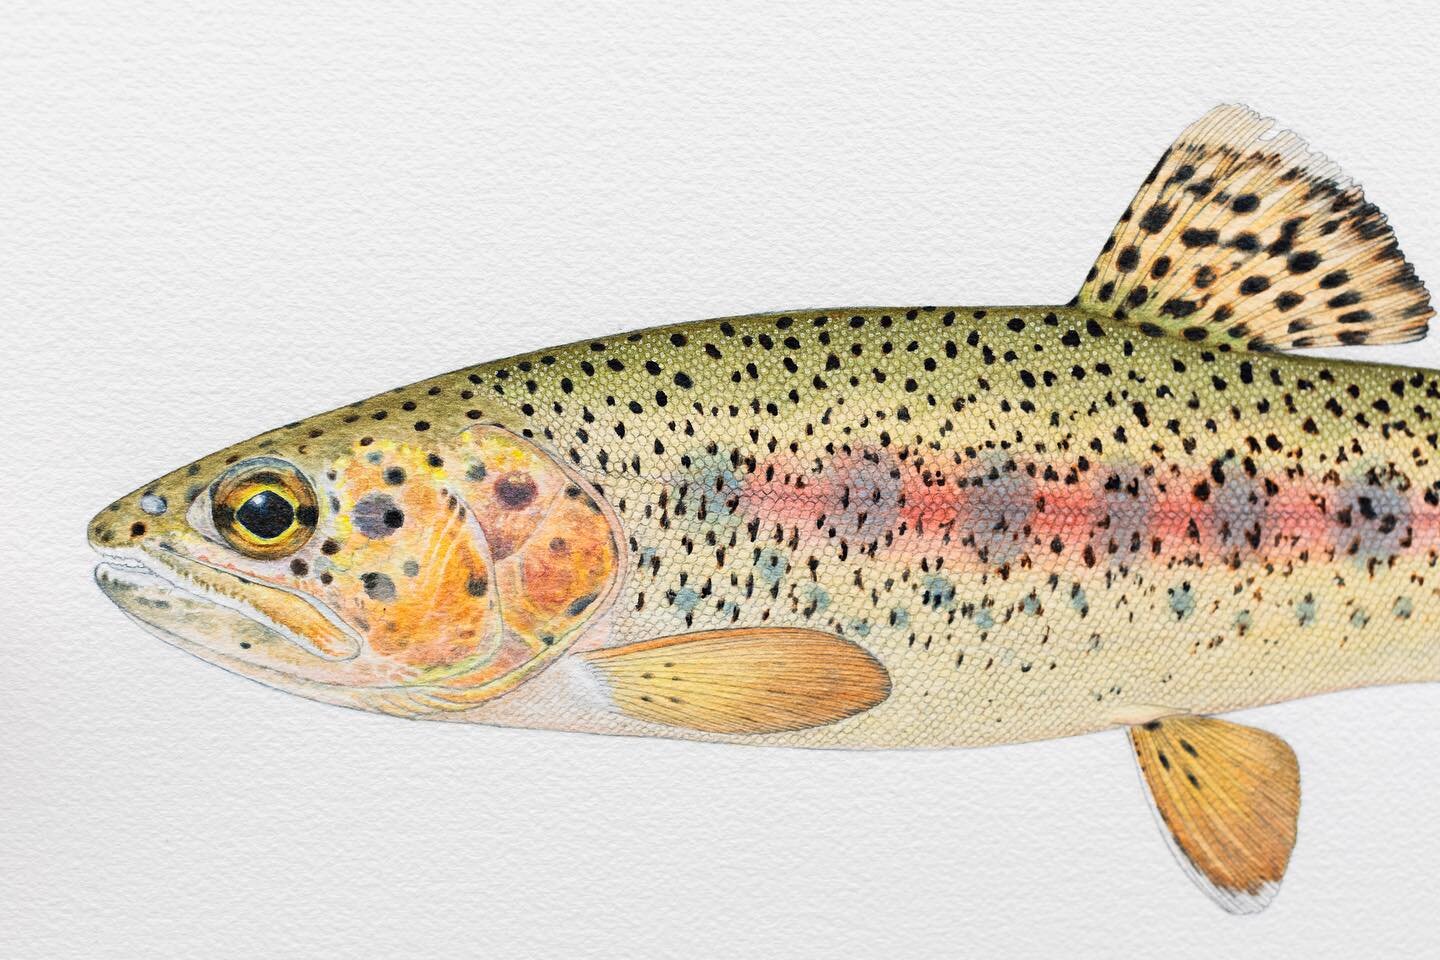 The Baja California Rainbow Trout aka Nelson&rsquo;s Trout Original is still available! A 1/1 watercolor painting of this incredibly rare trout. These typically don&rsquo;t last long &mdash; so if you&rsquo;ve been dreaming about owning some of Chase